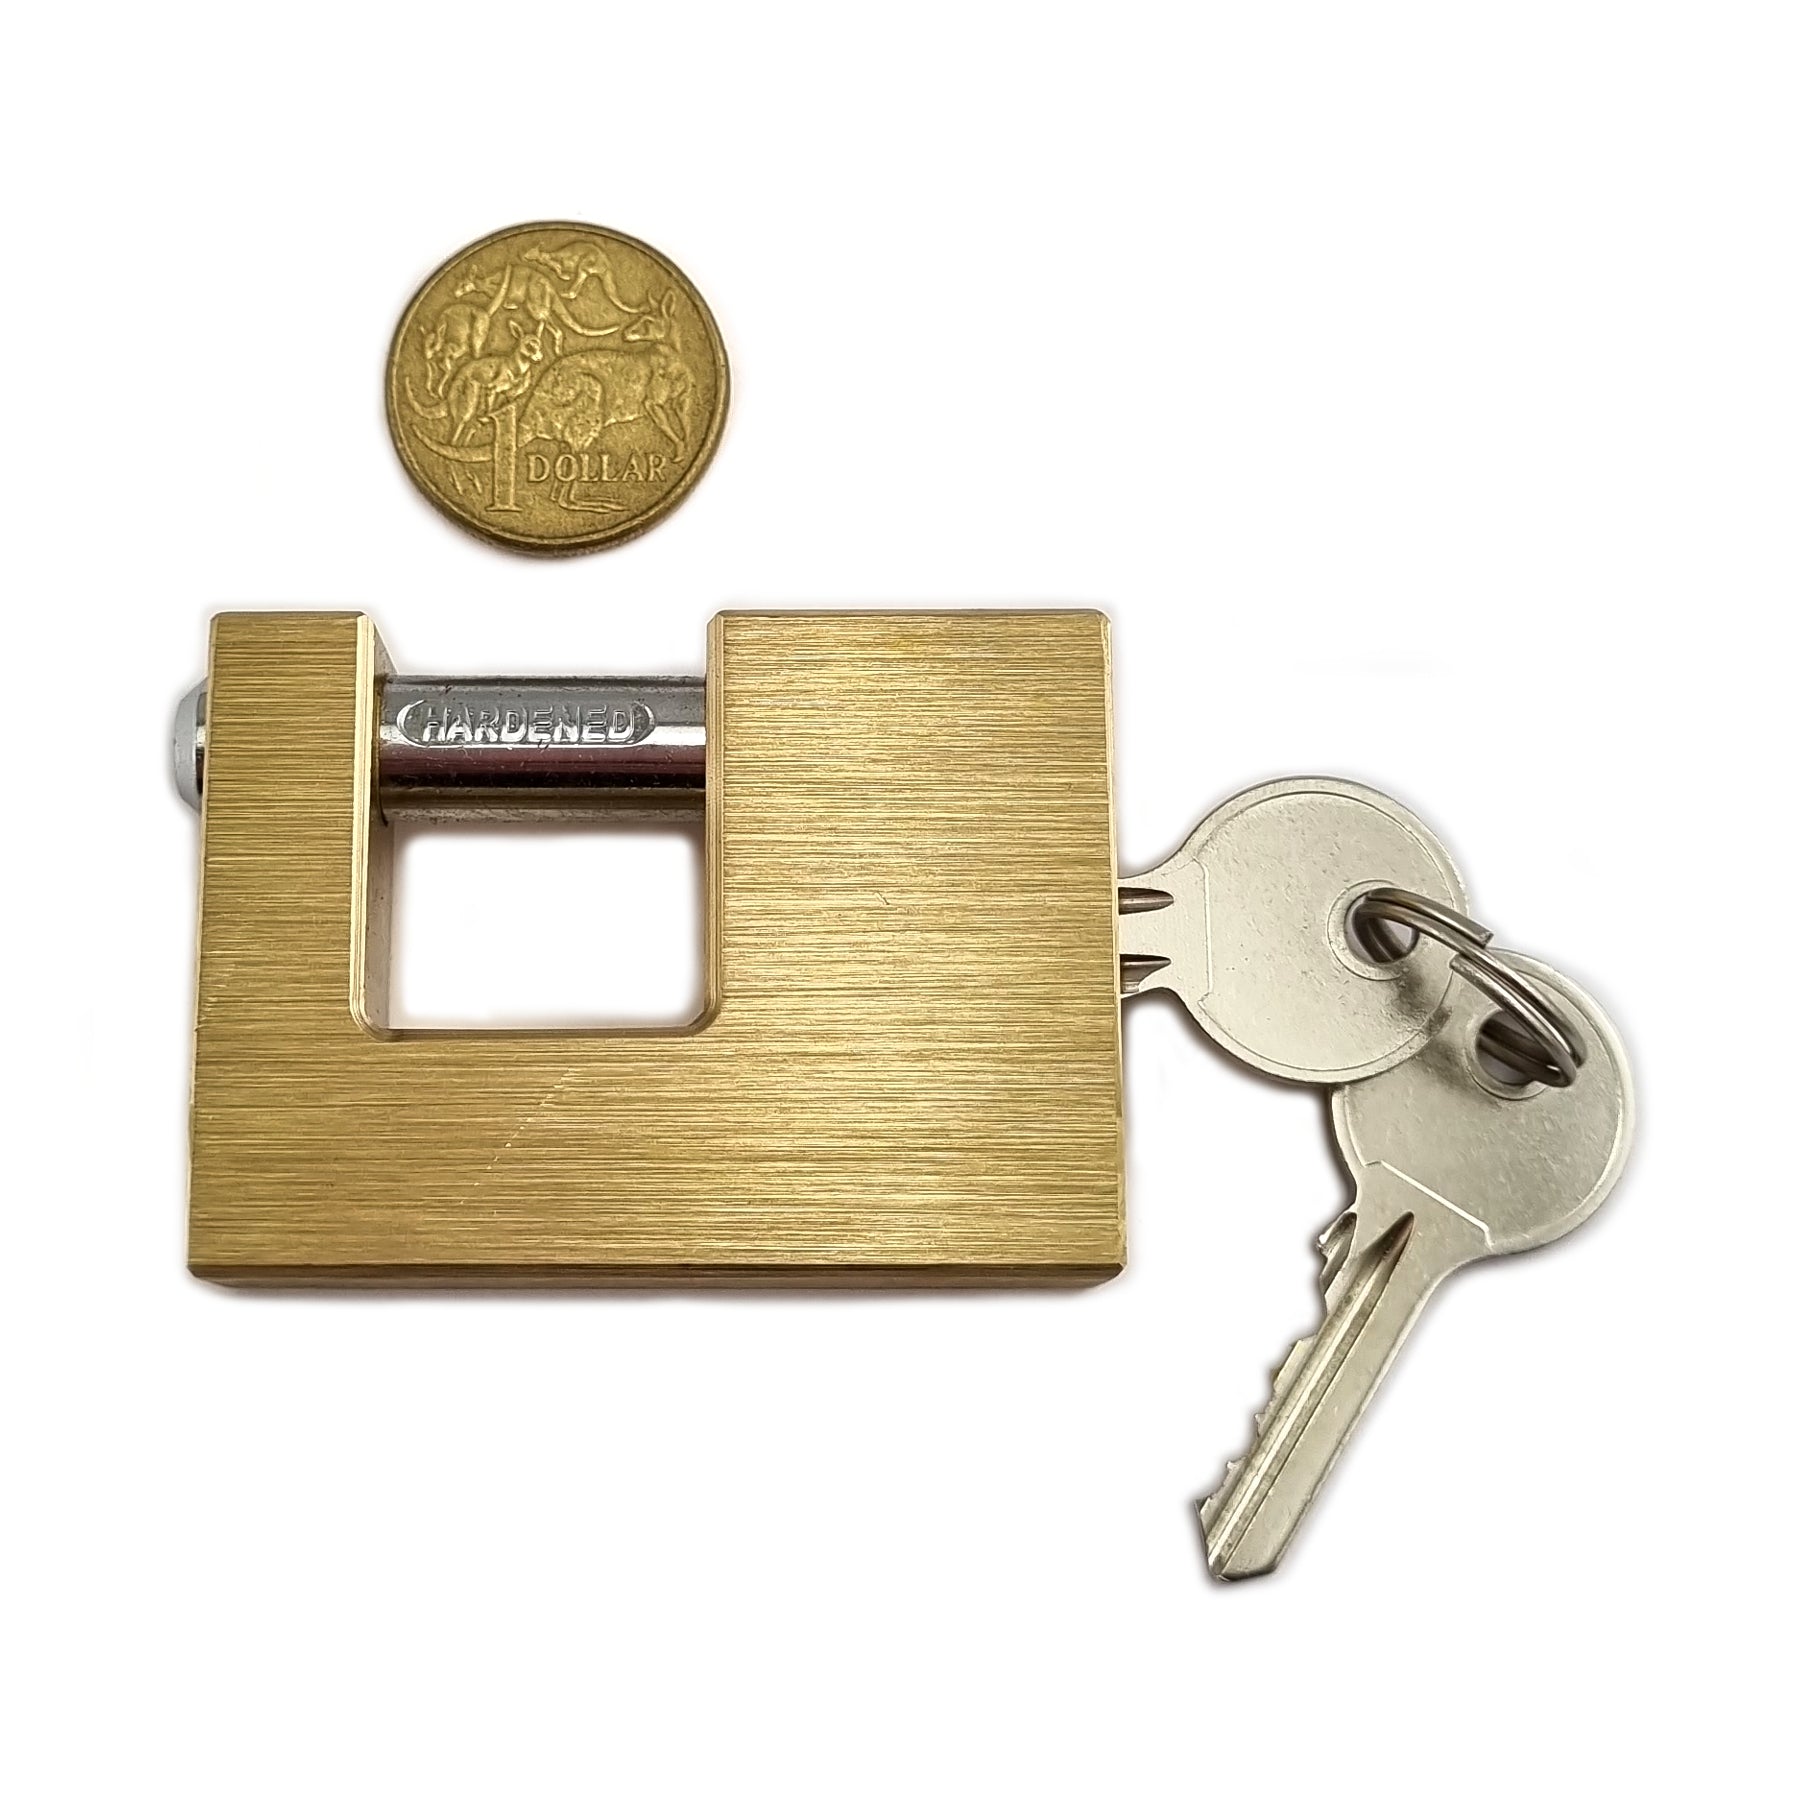 High-Security Monoblock Padlock. Shackle size: 12mm. Australia wide delivery.